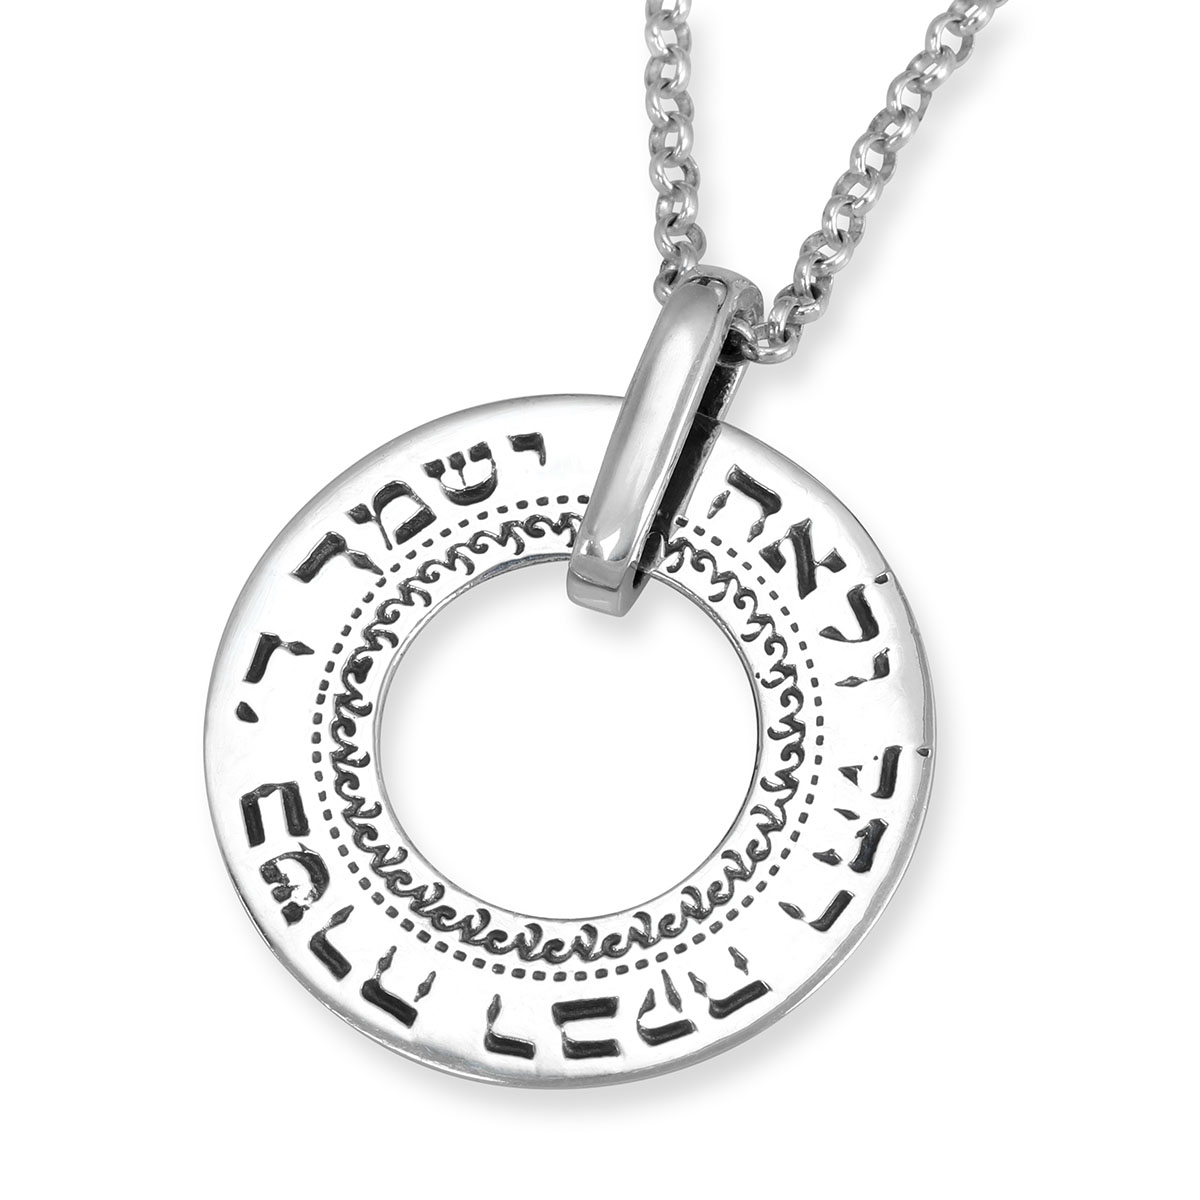 Large Wheel Necklace with Daughter's Blessing - 1